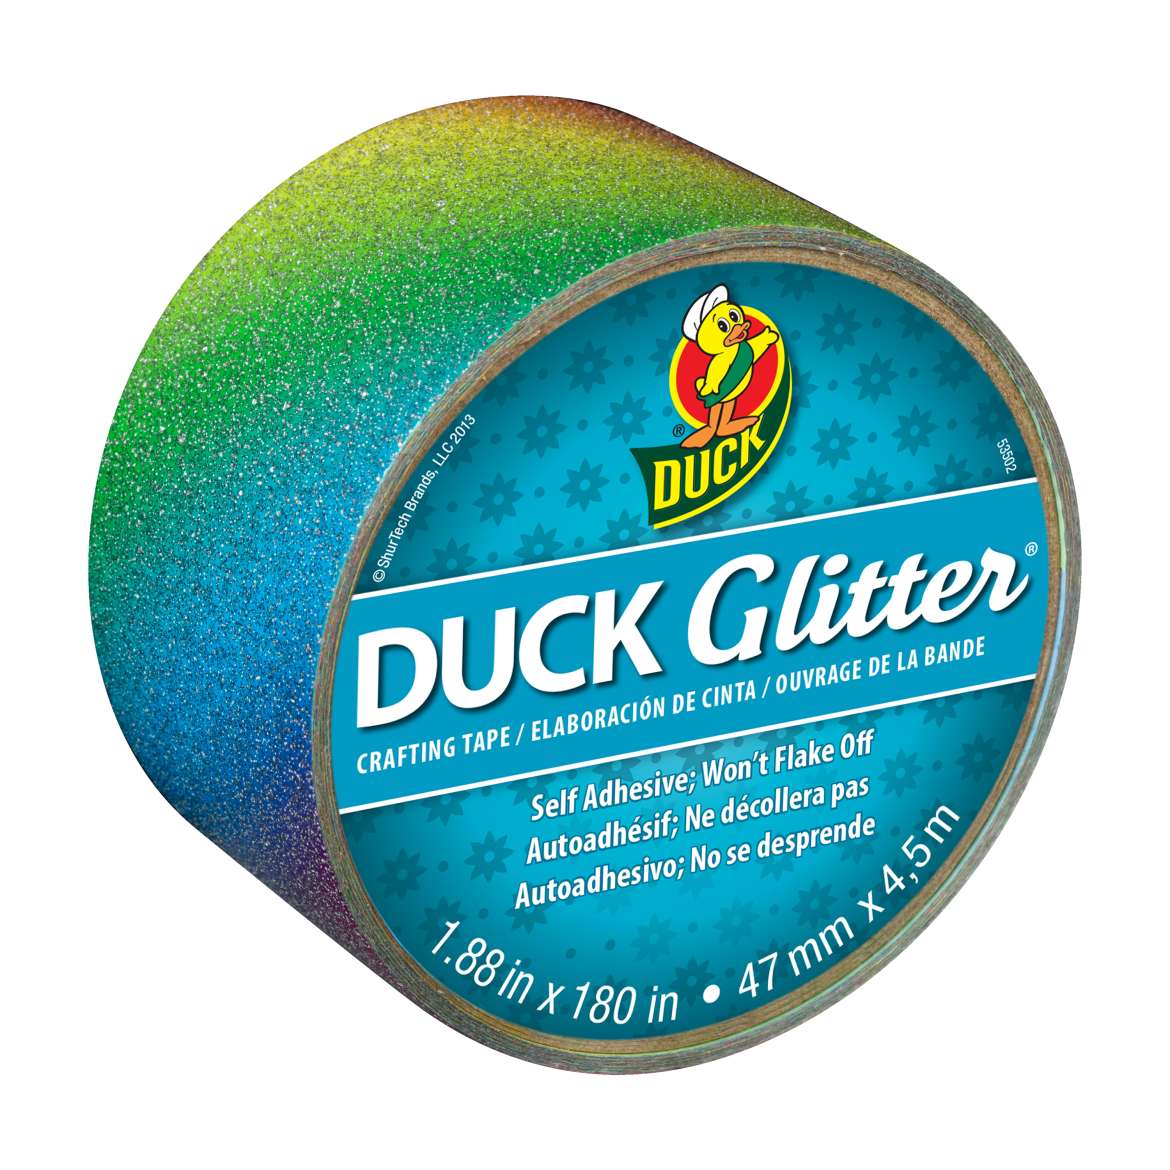 Duck Glitter® Crafting Tape Image